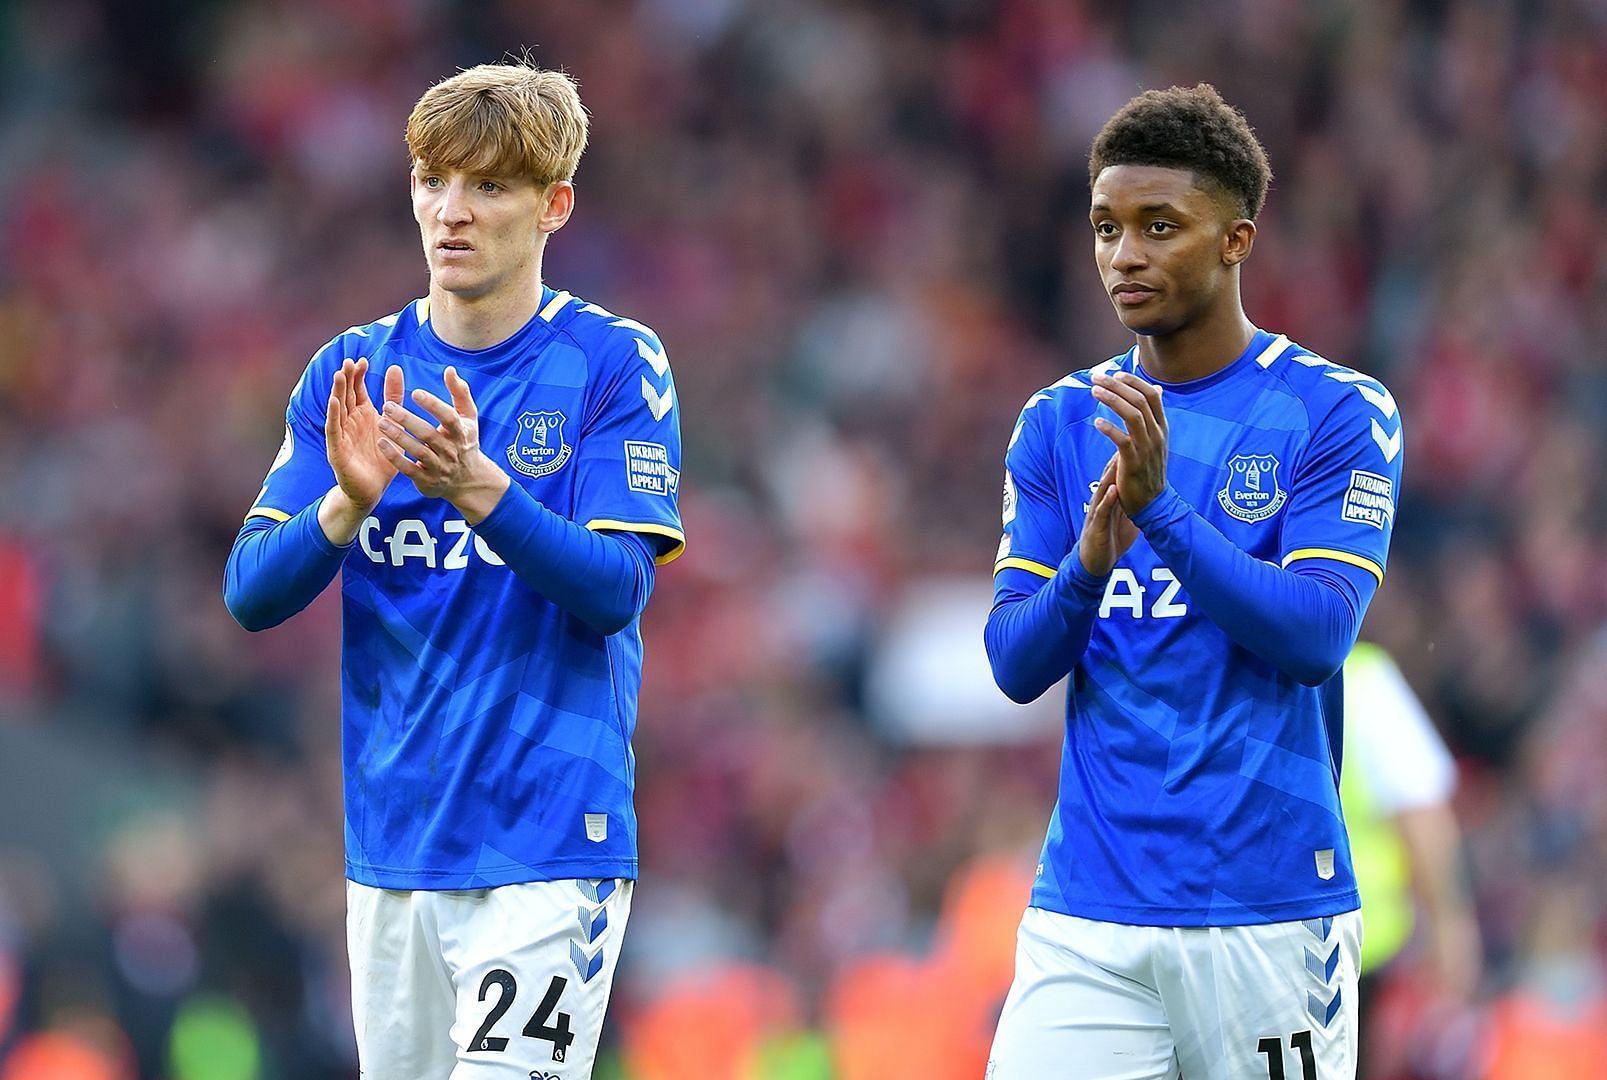 The Toffees have dropped into the relegation zone after losing to Liverpool